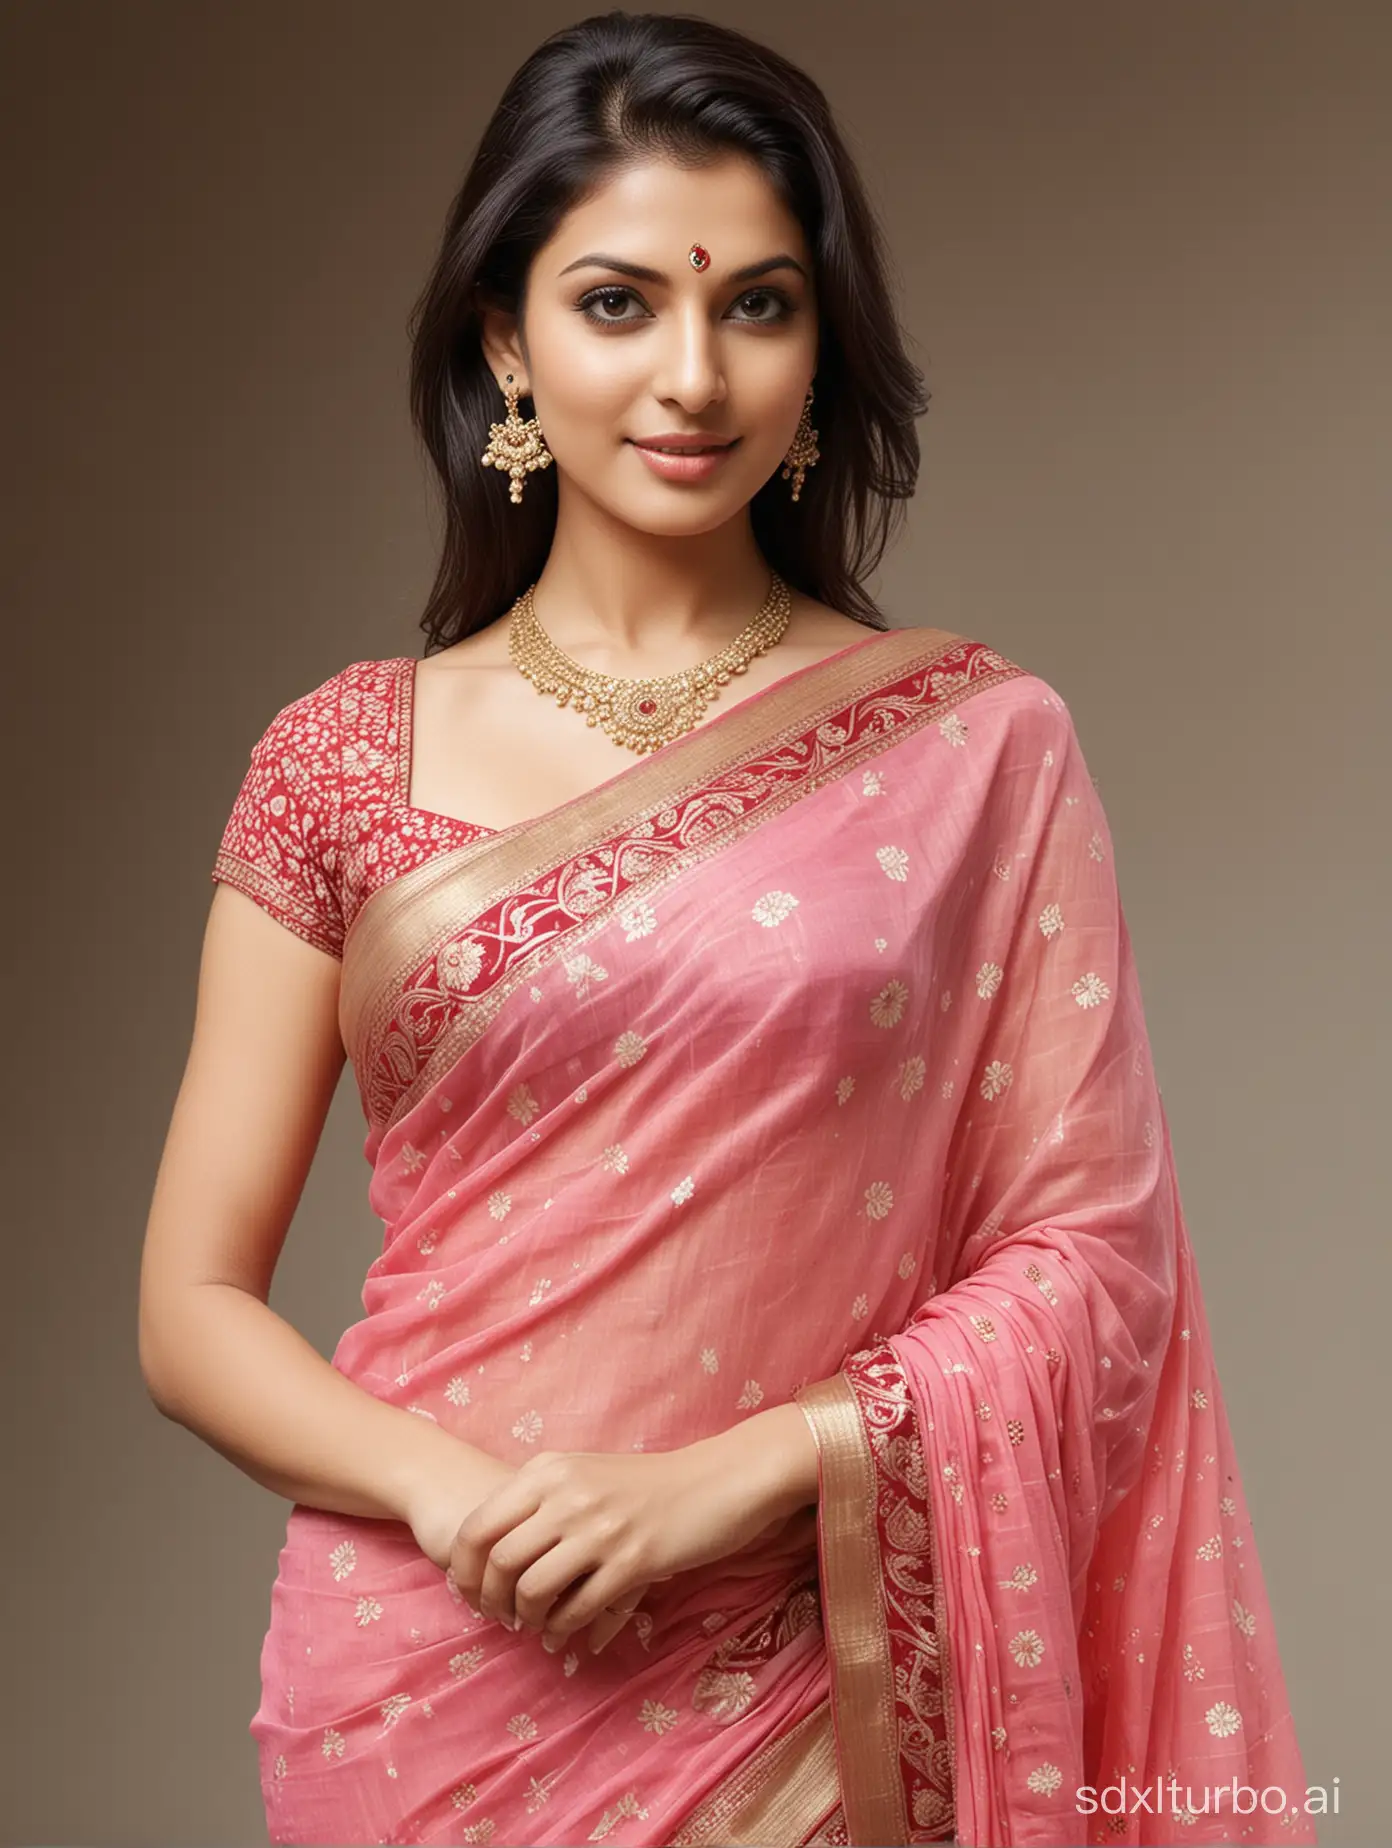 Exquisite-Indian-Women-in-Traditional-Sarees